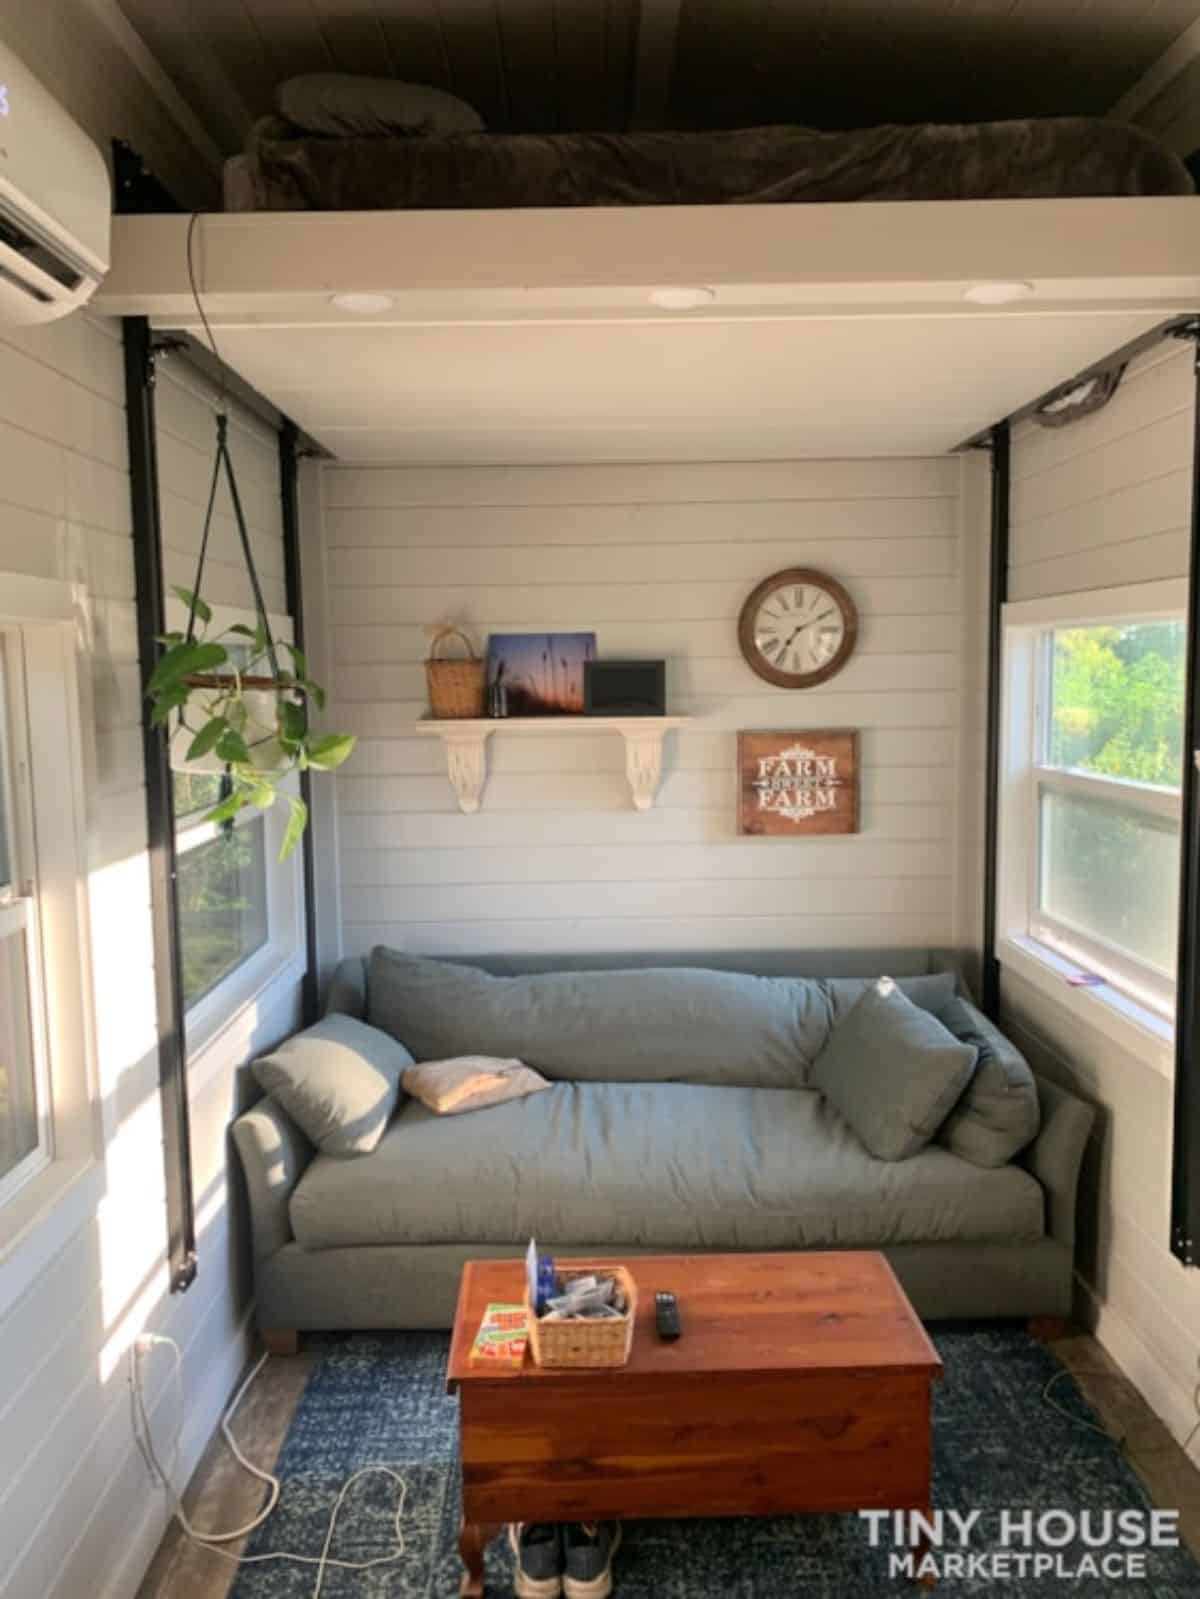 Living area of towable tiny home